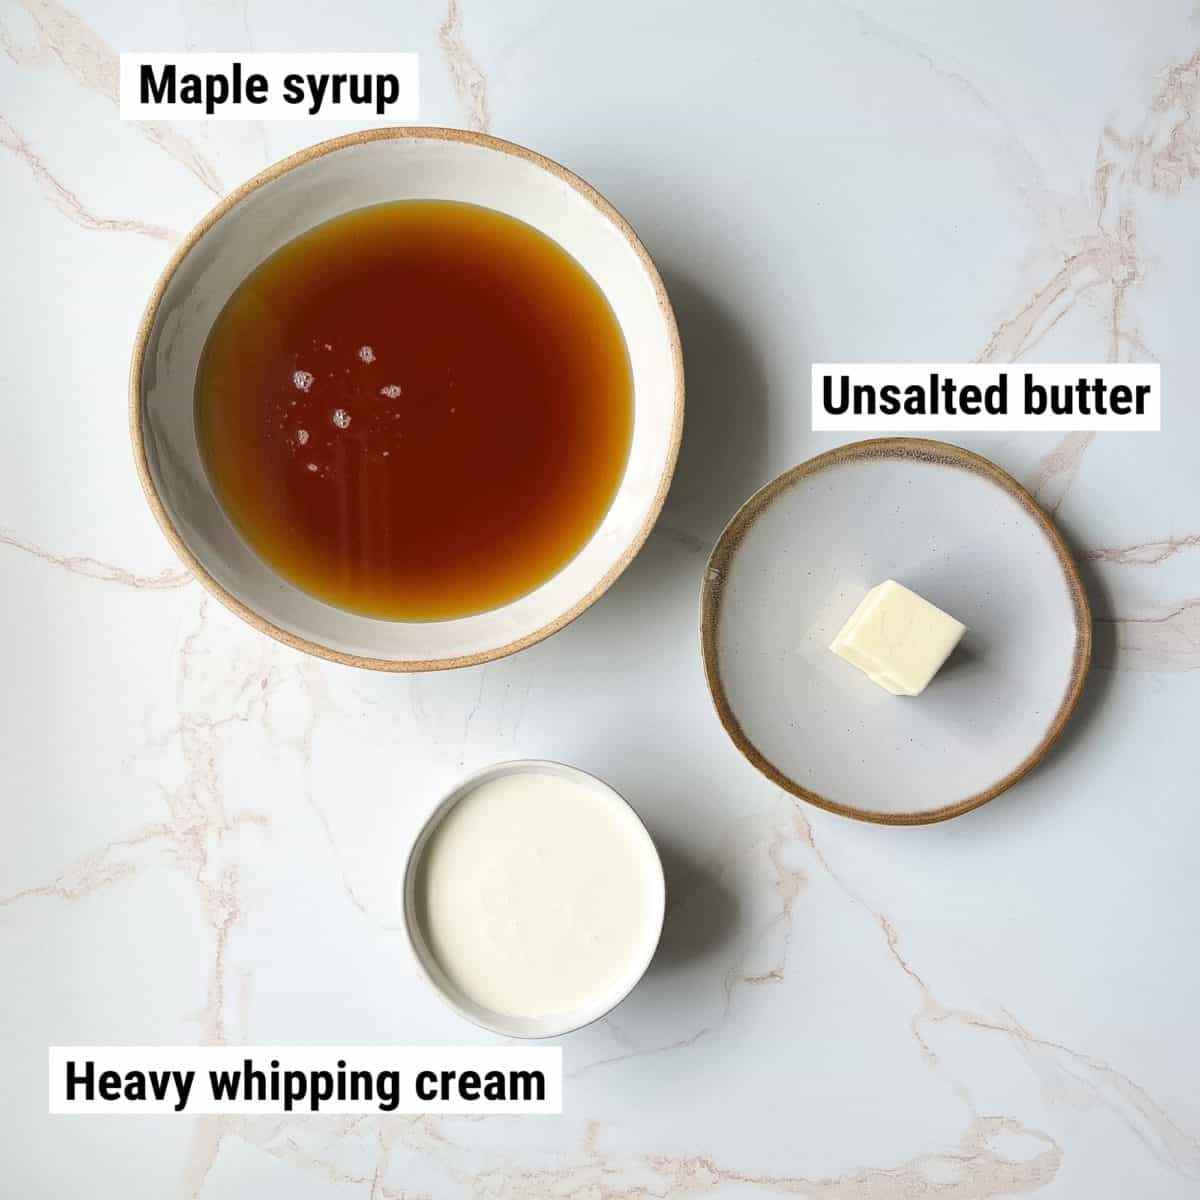 The recipe ingredients used to make maple fudge spread out on a table.